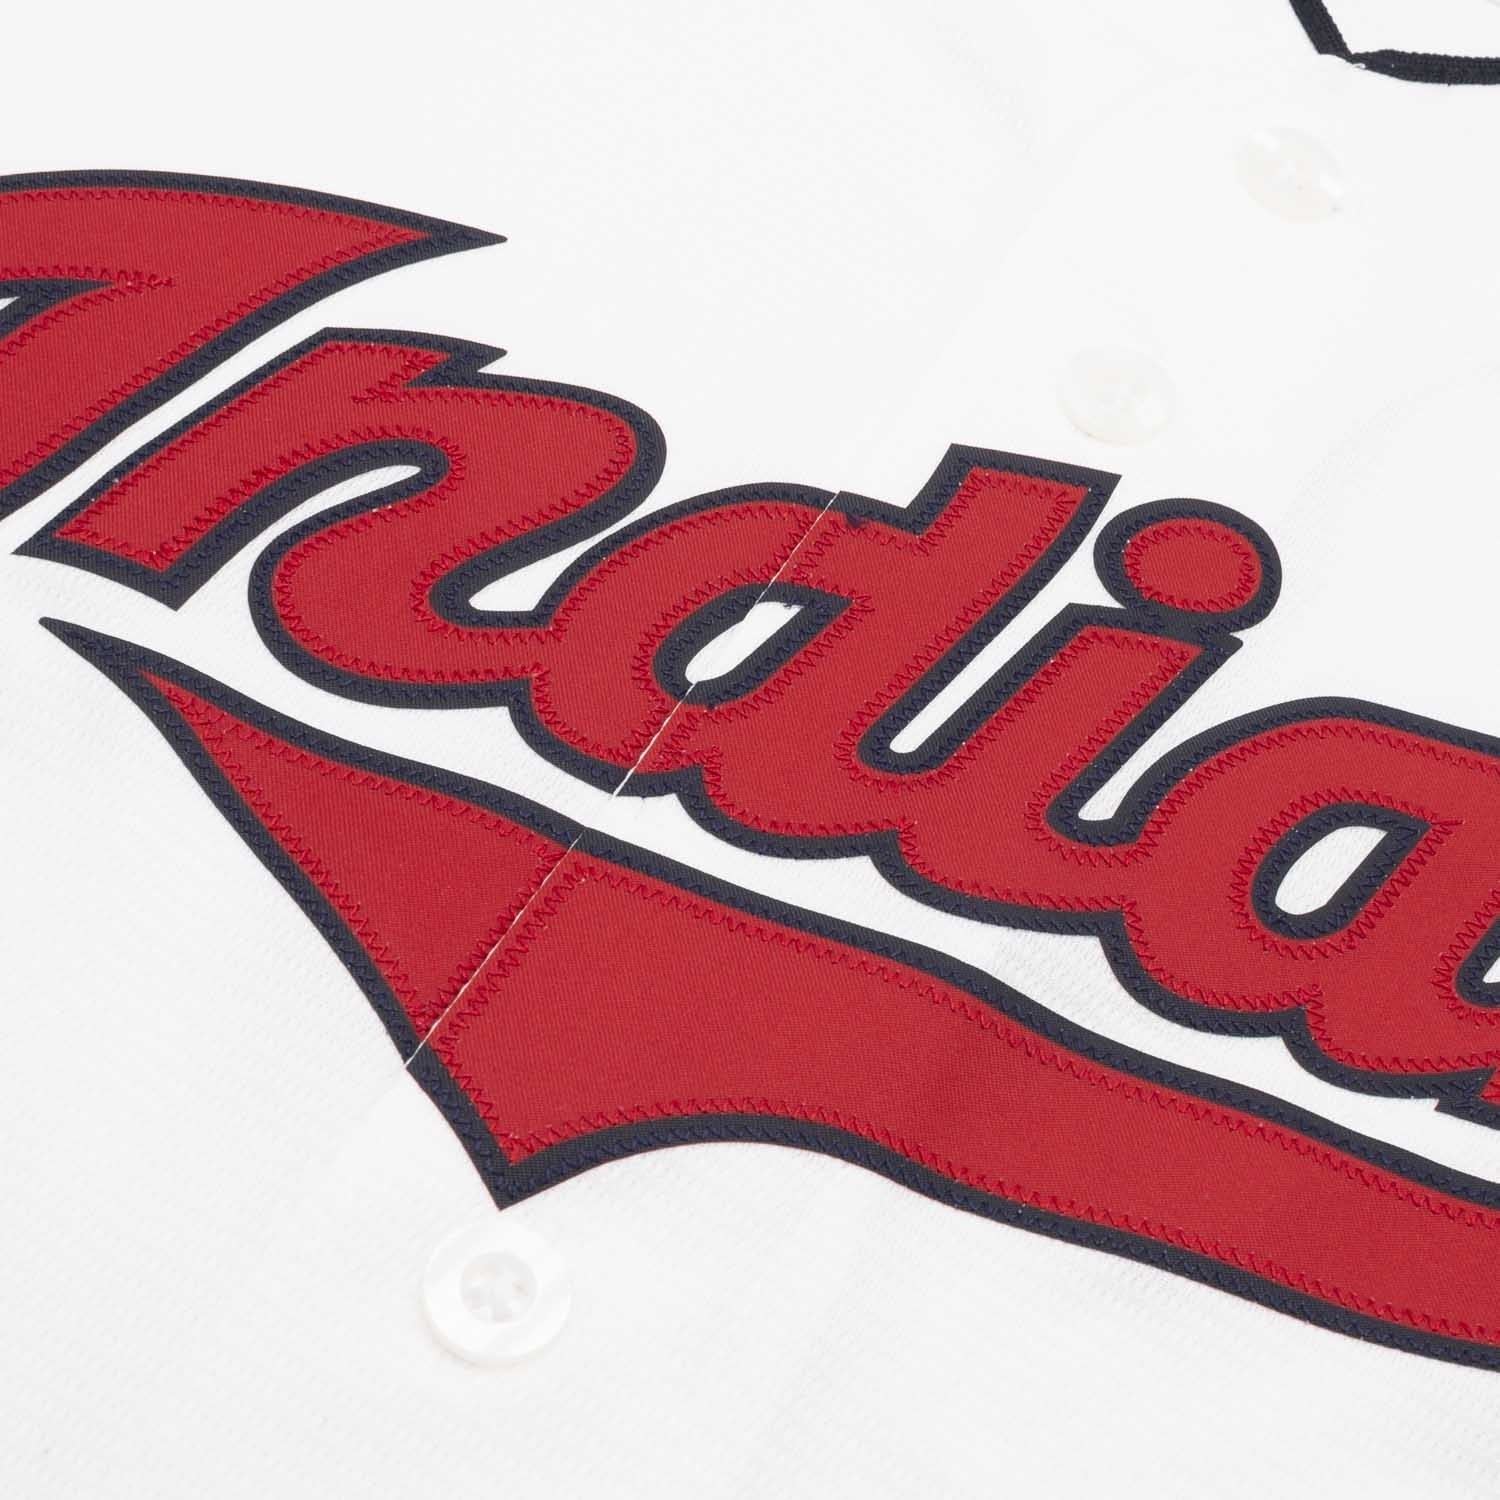 Cleveland Indians Official MLB Replica Home Jersey White Nike